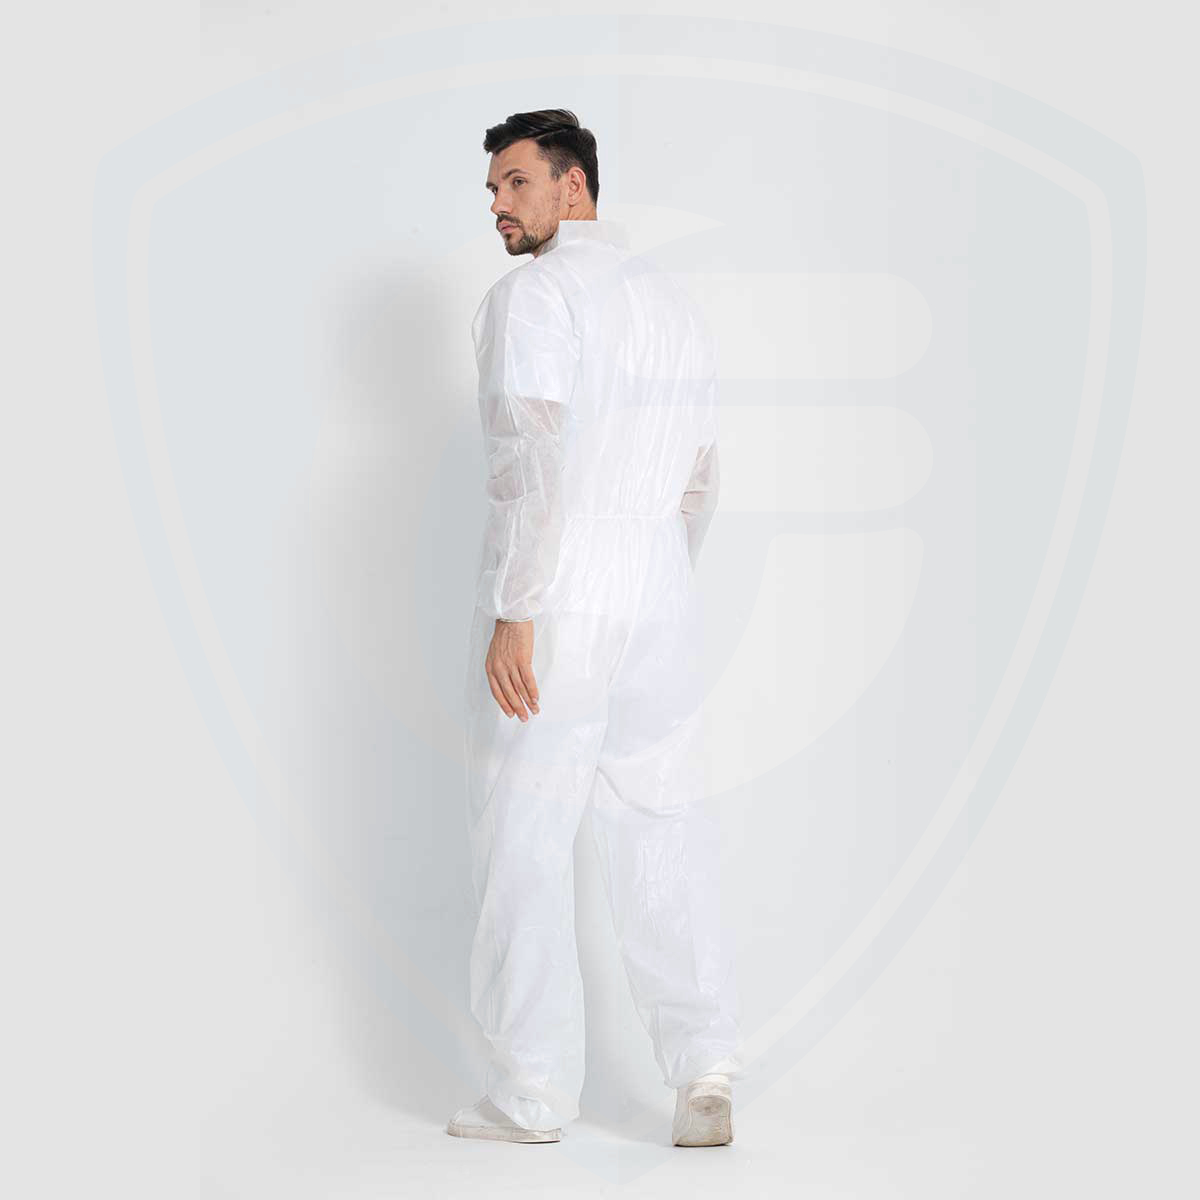 White PP+PE Nonwoven Industrial Safety Anti-Static Disposable Coverall Without Hood